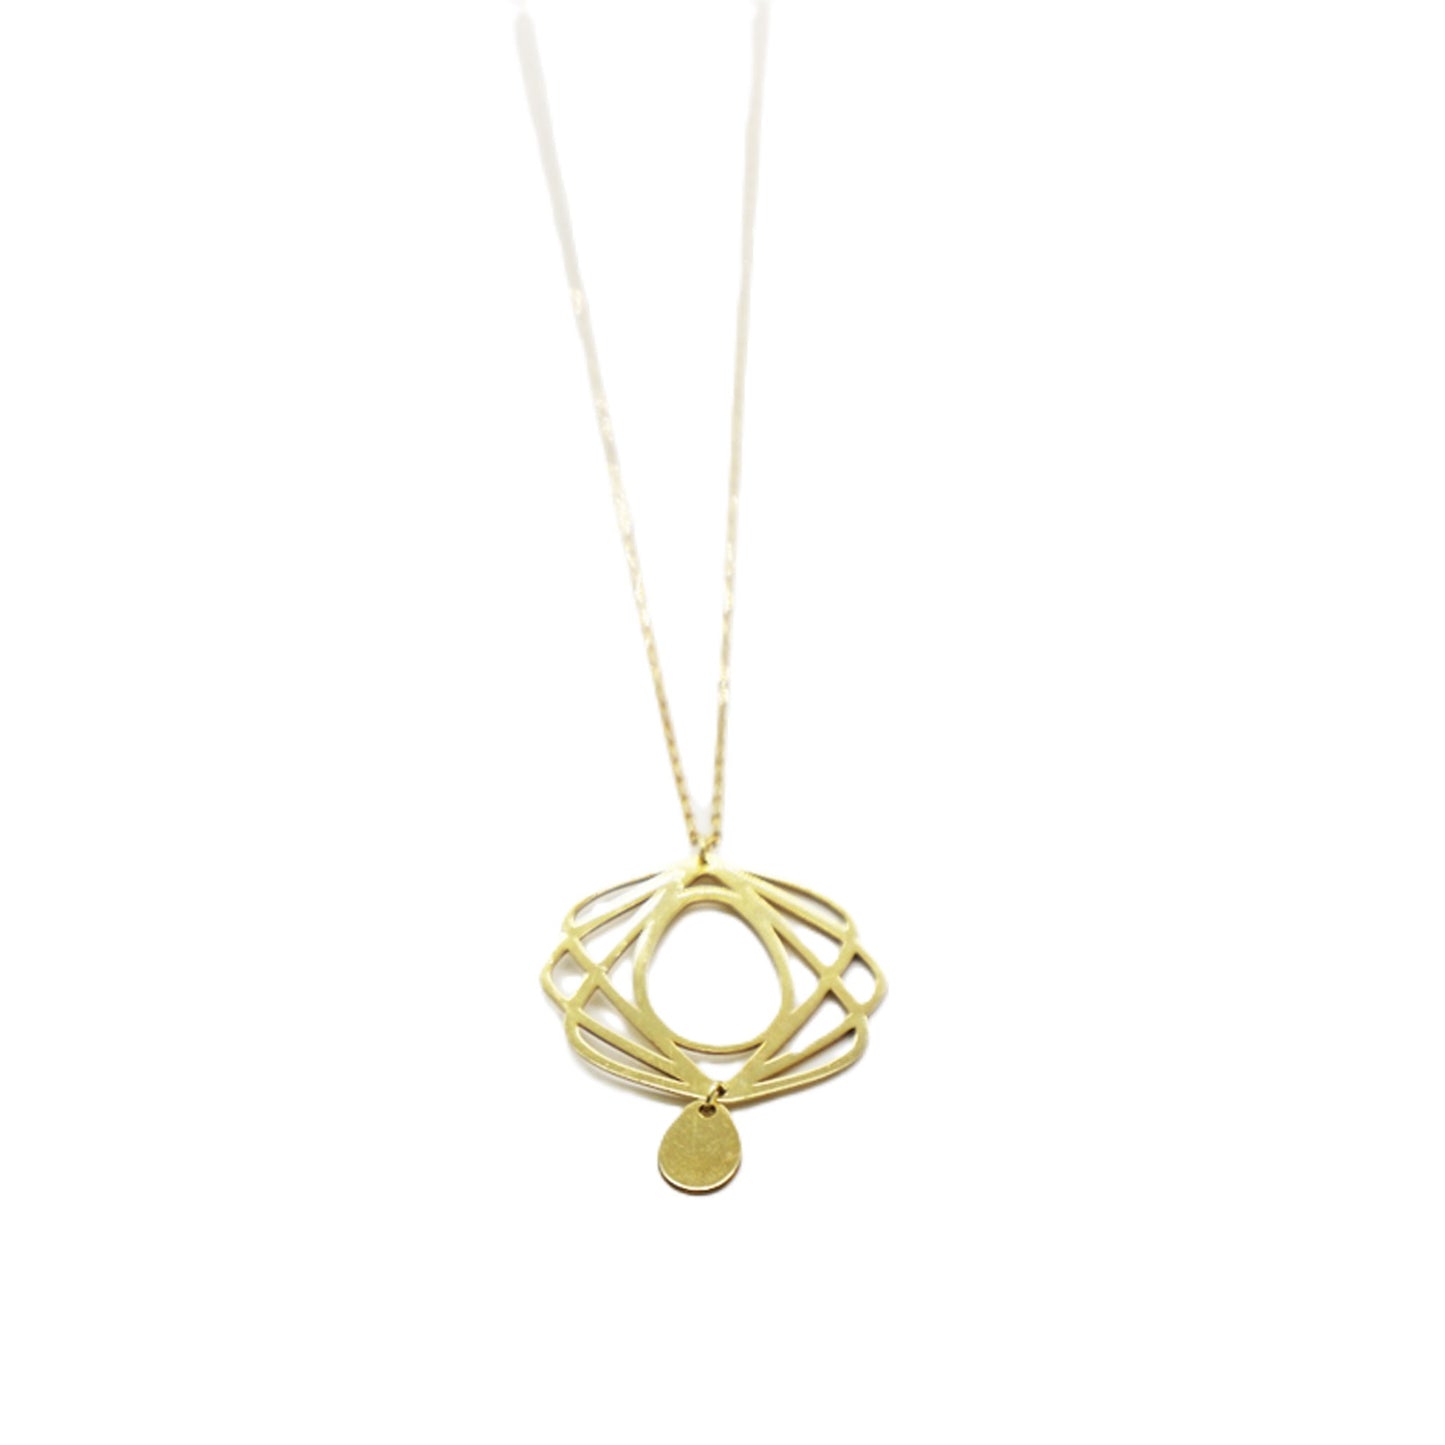 GUIMARD NECKLACE MEDALLION / silver 925, 18kt gold plated